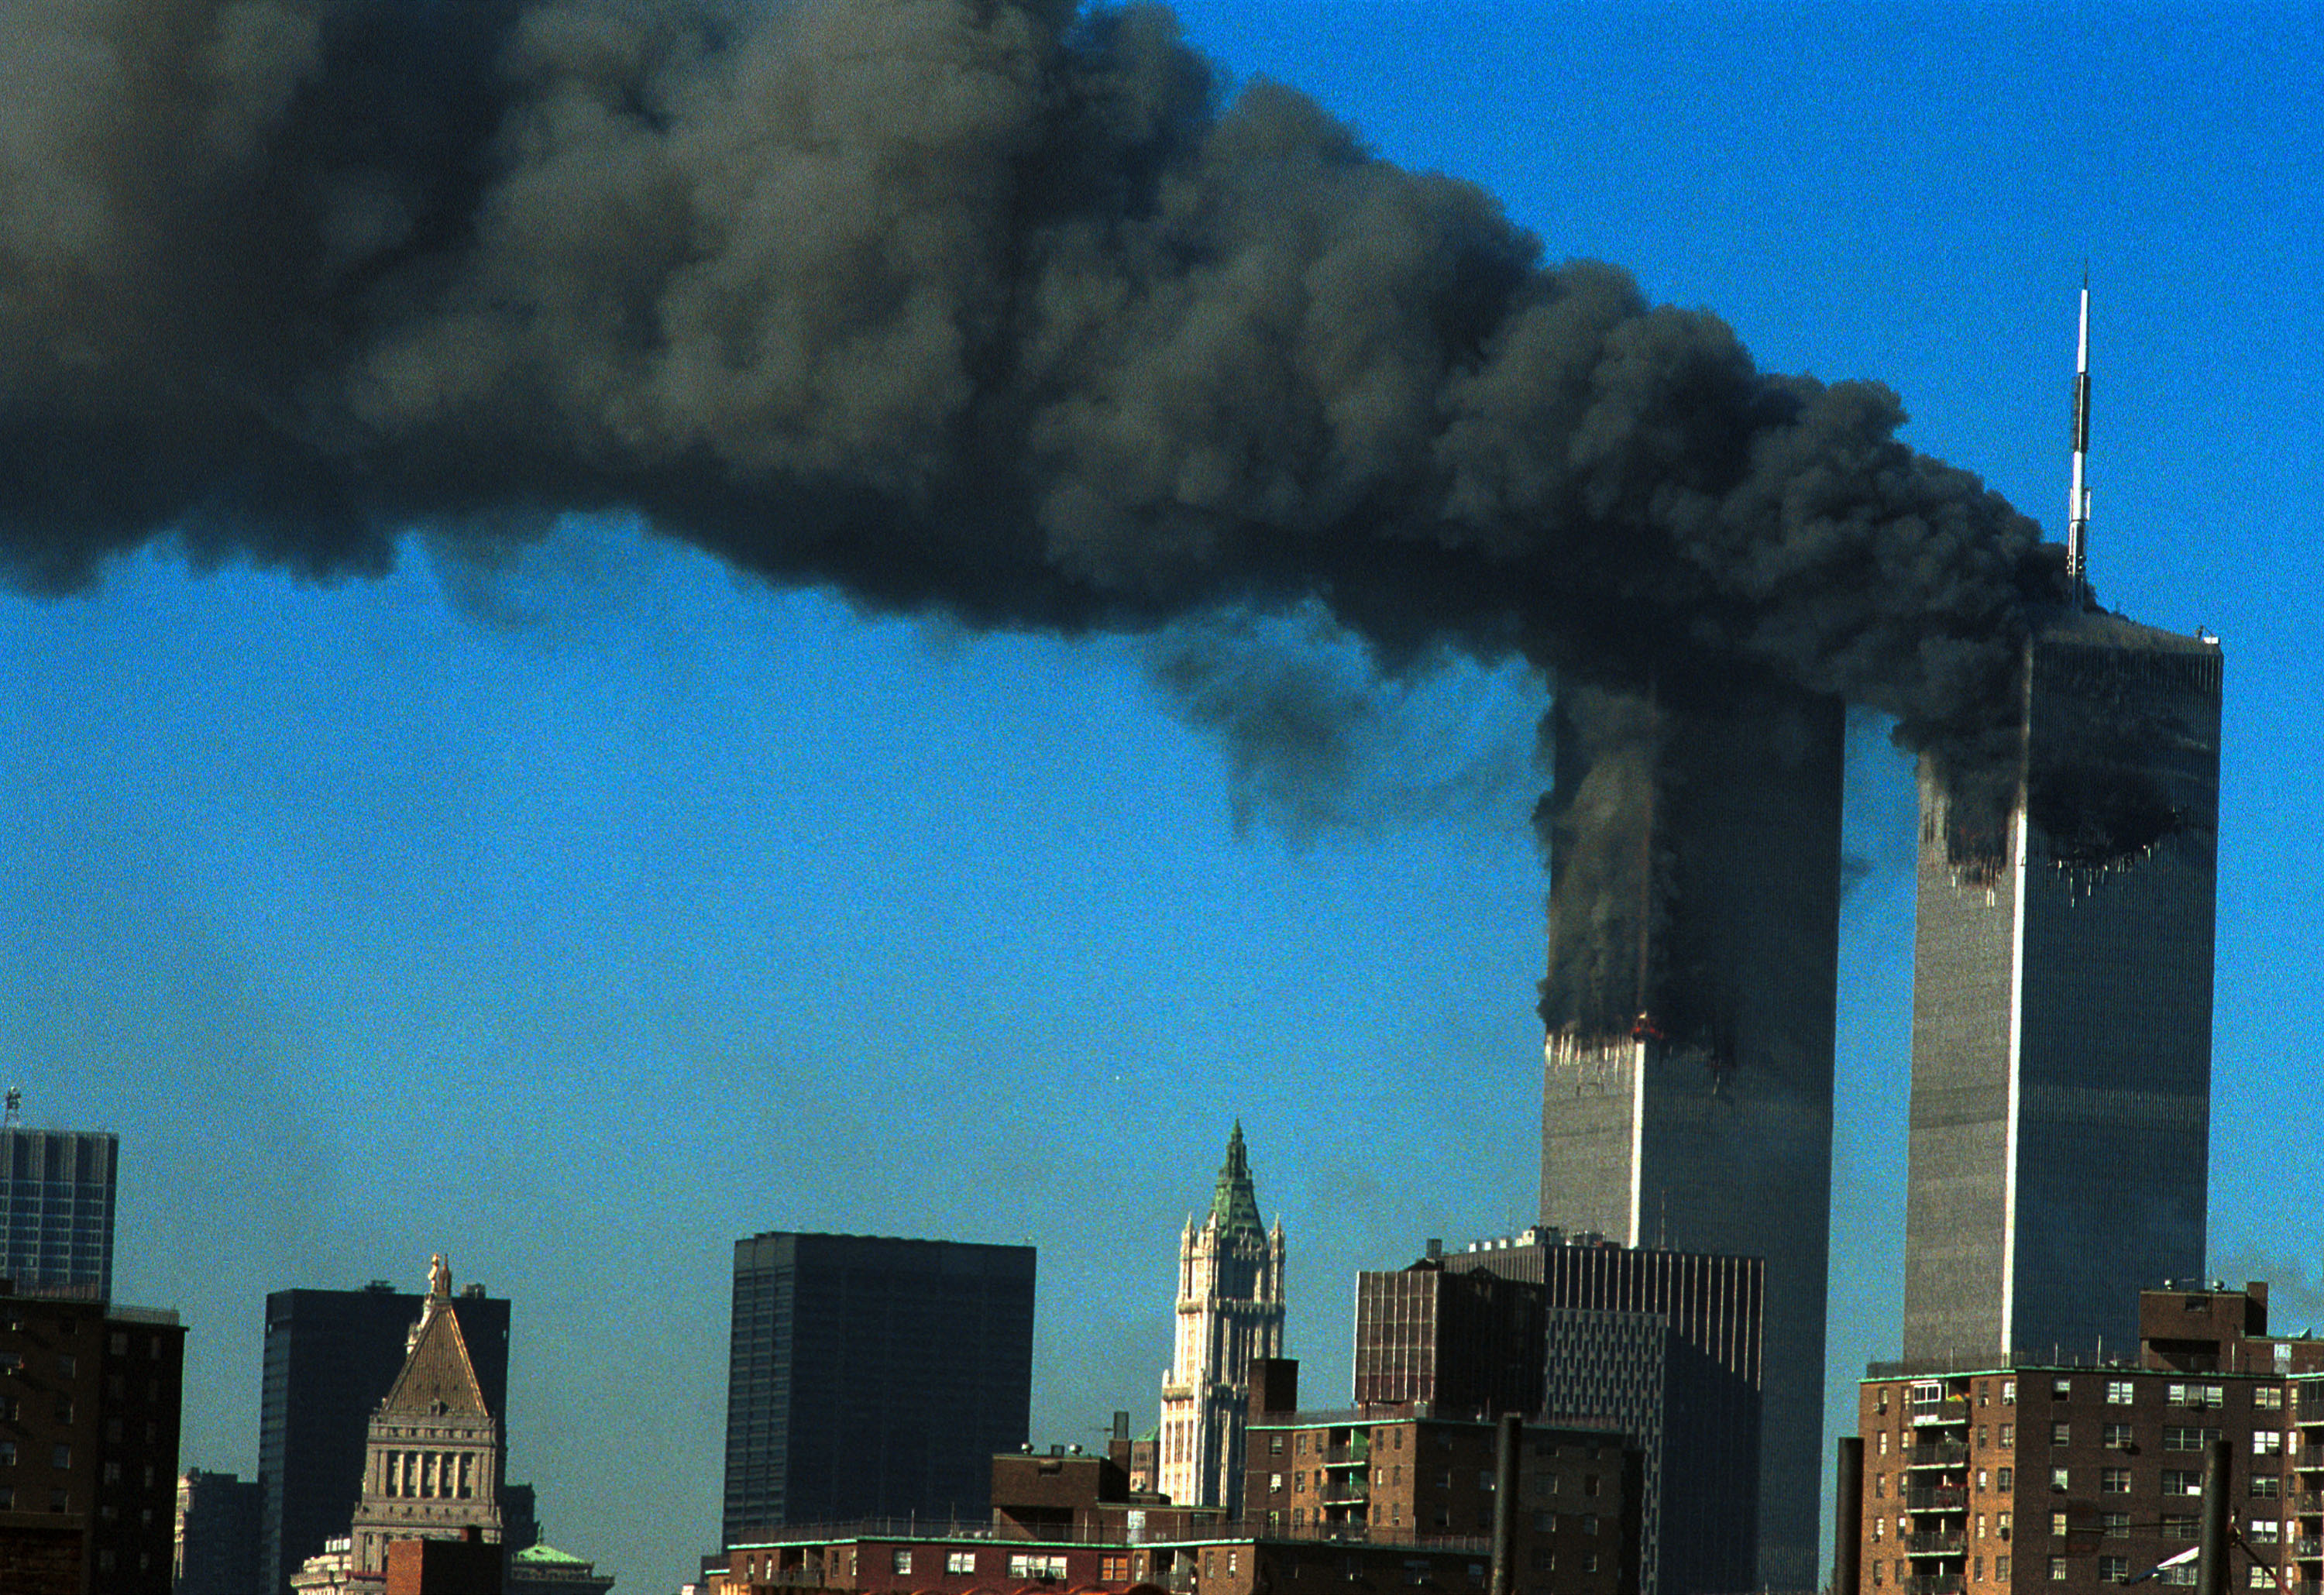 The federal government approved the visa for the 9/11 KSM “Mastermind” just before the attacks